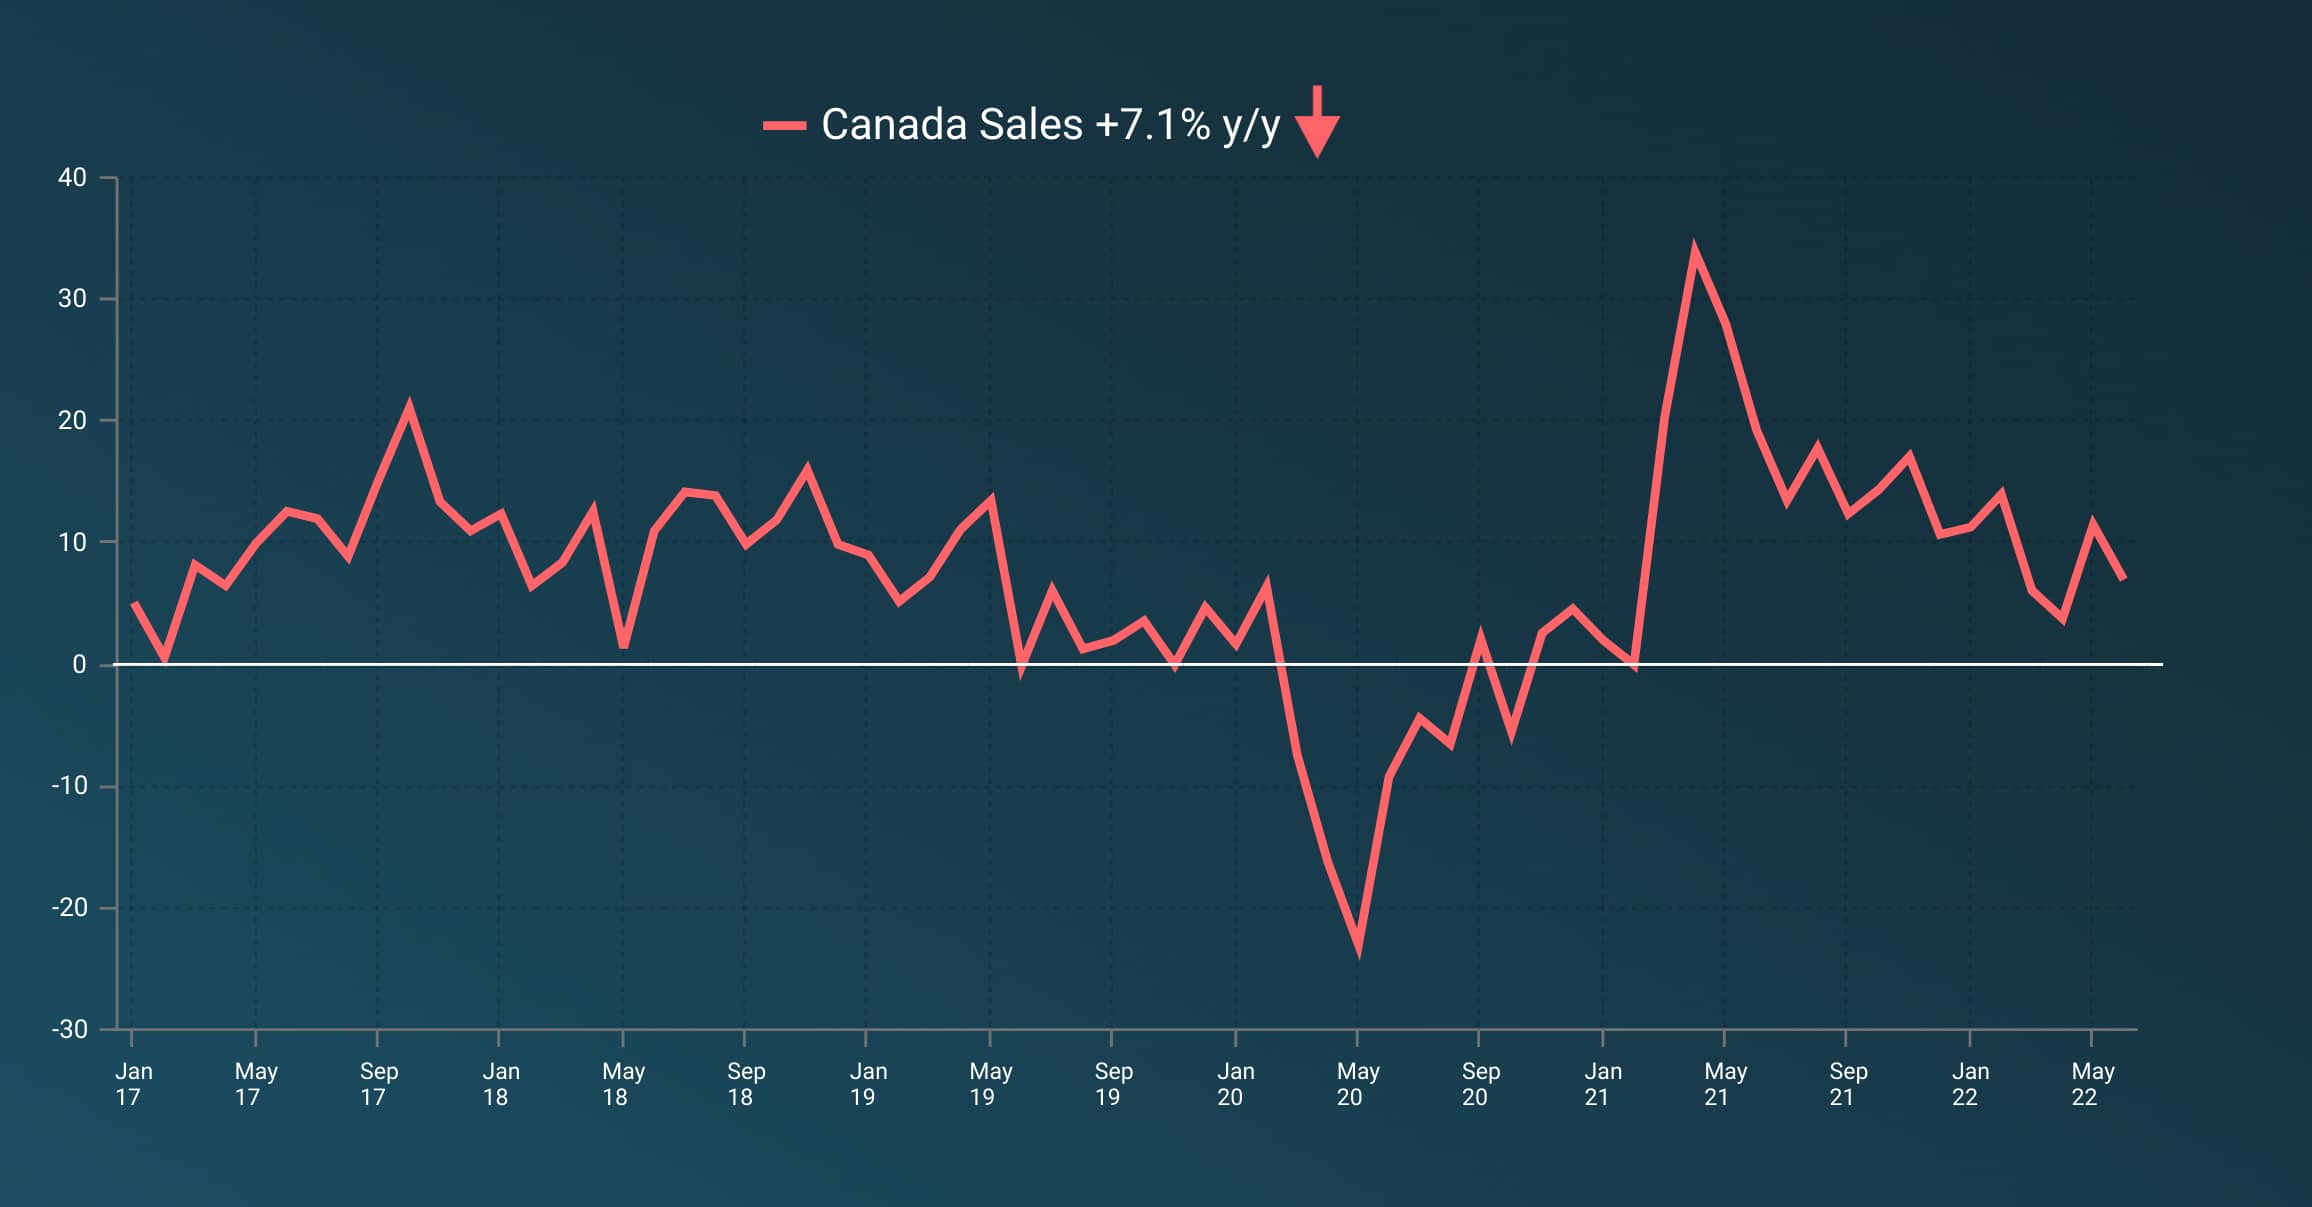 A line graph showing the ups and downs in the Canada Small Business sales since January 2017.